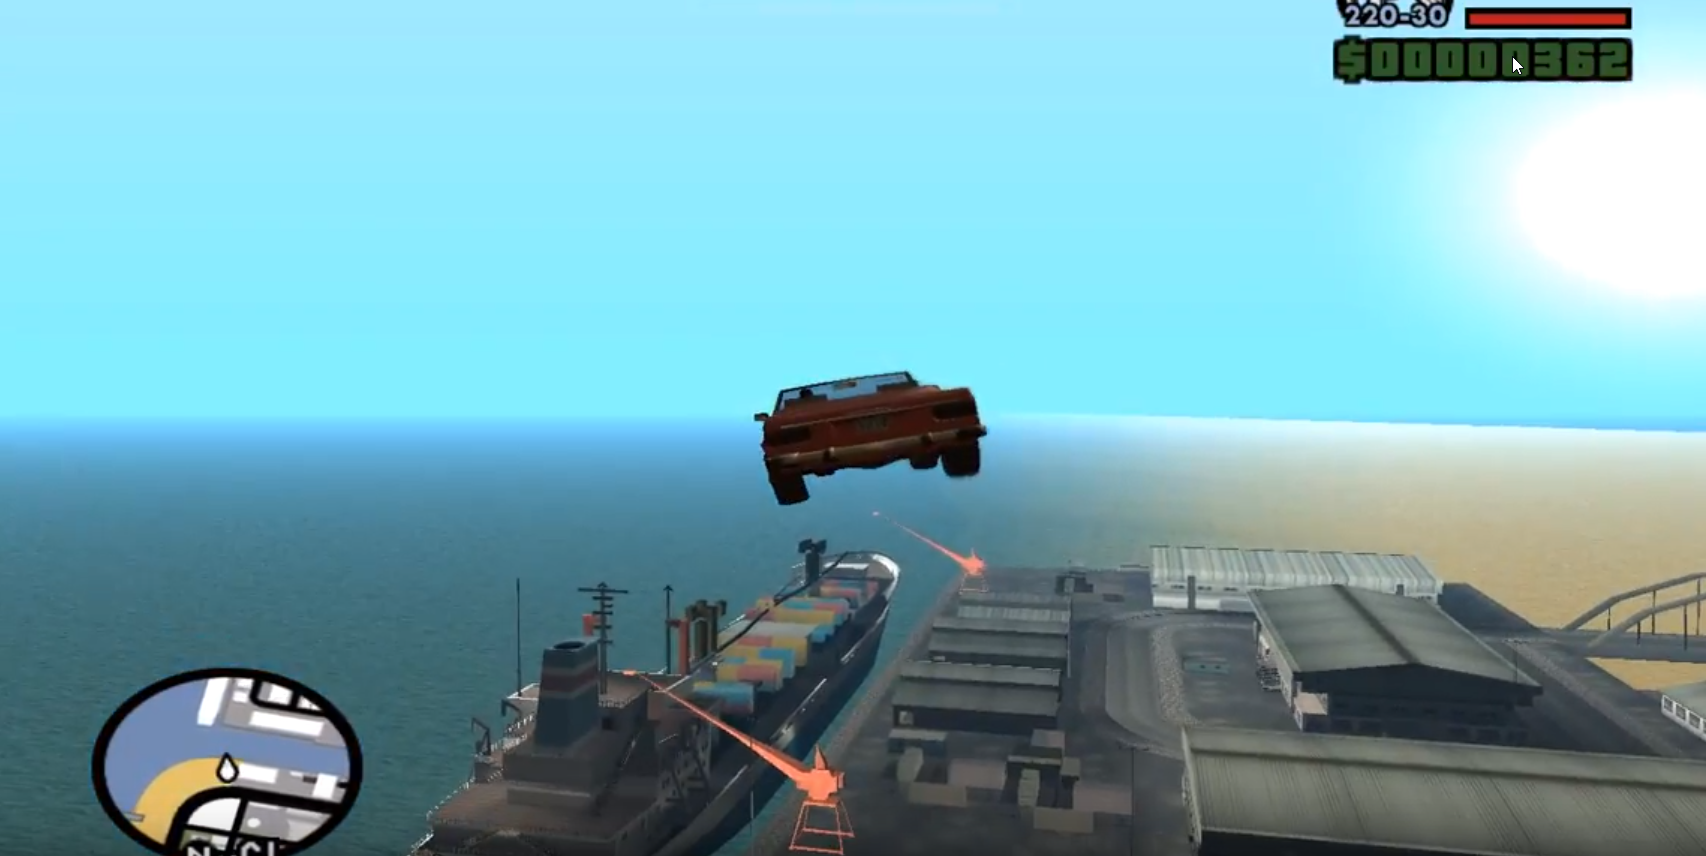 The result of using the flying car cheat code in GTA San Andreas